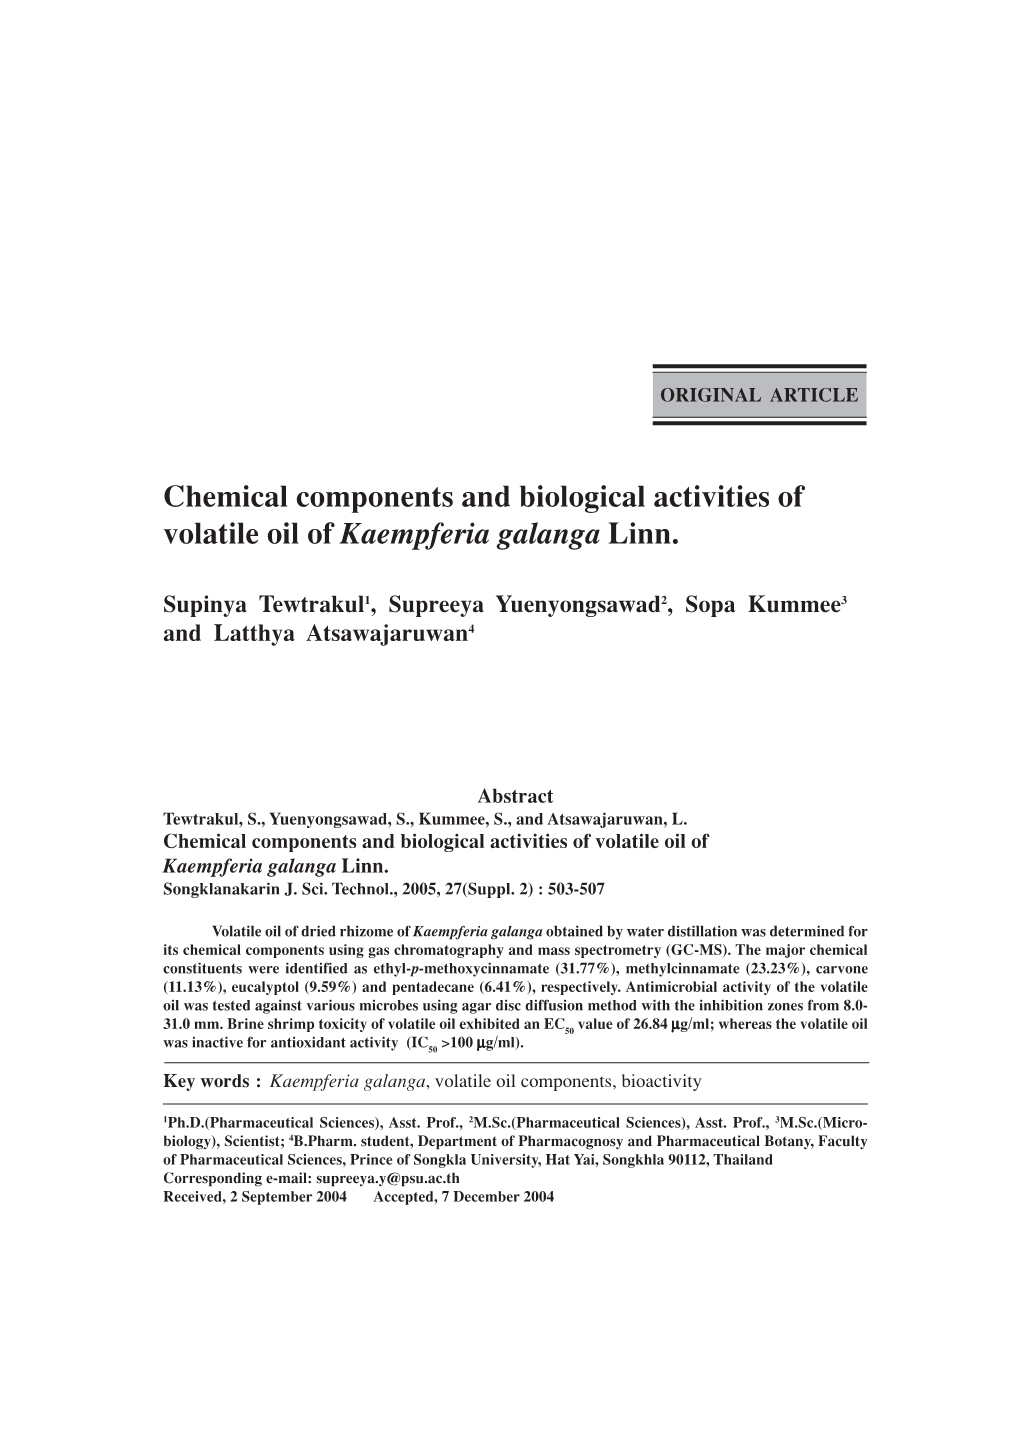 Chemical Components and Biological Activities of Volatile Oil of Kaempferia Galanga Linn